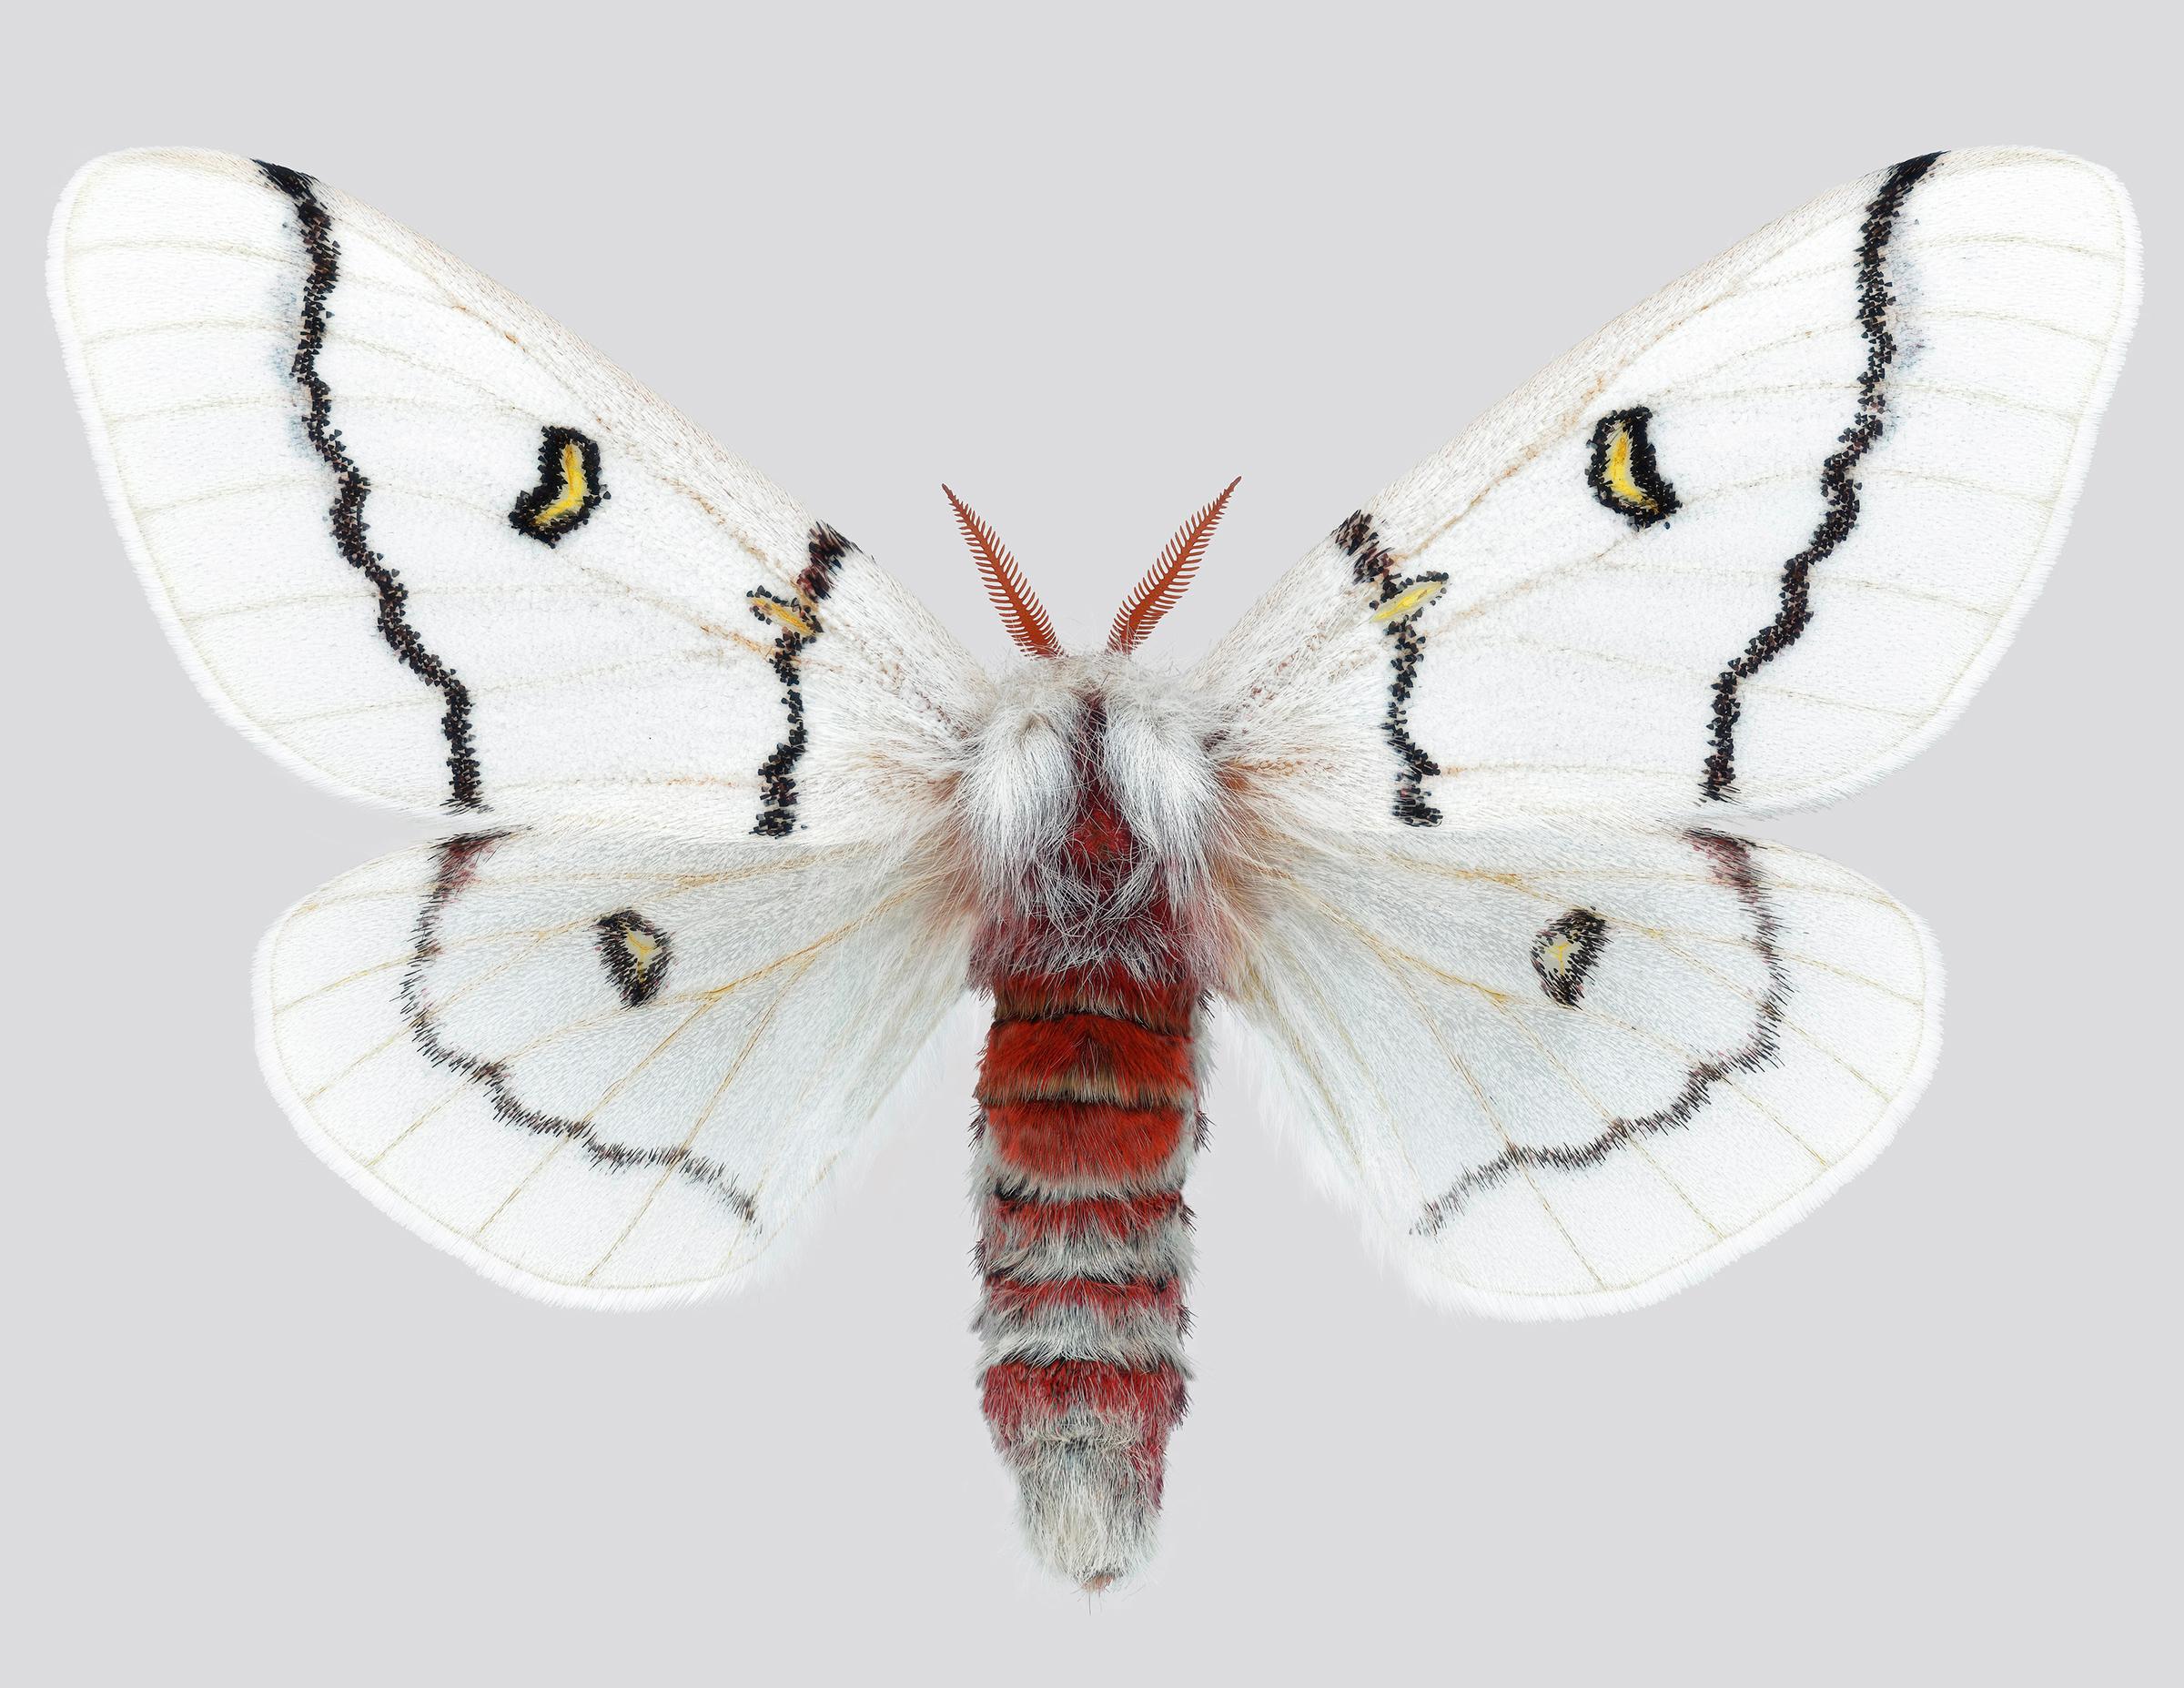 Joseph Scheer Color Photograph - Hemileuca Neomoegeni White, Yellow, Black Stripes Moth Insect Wings Nature